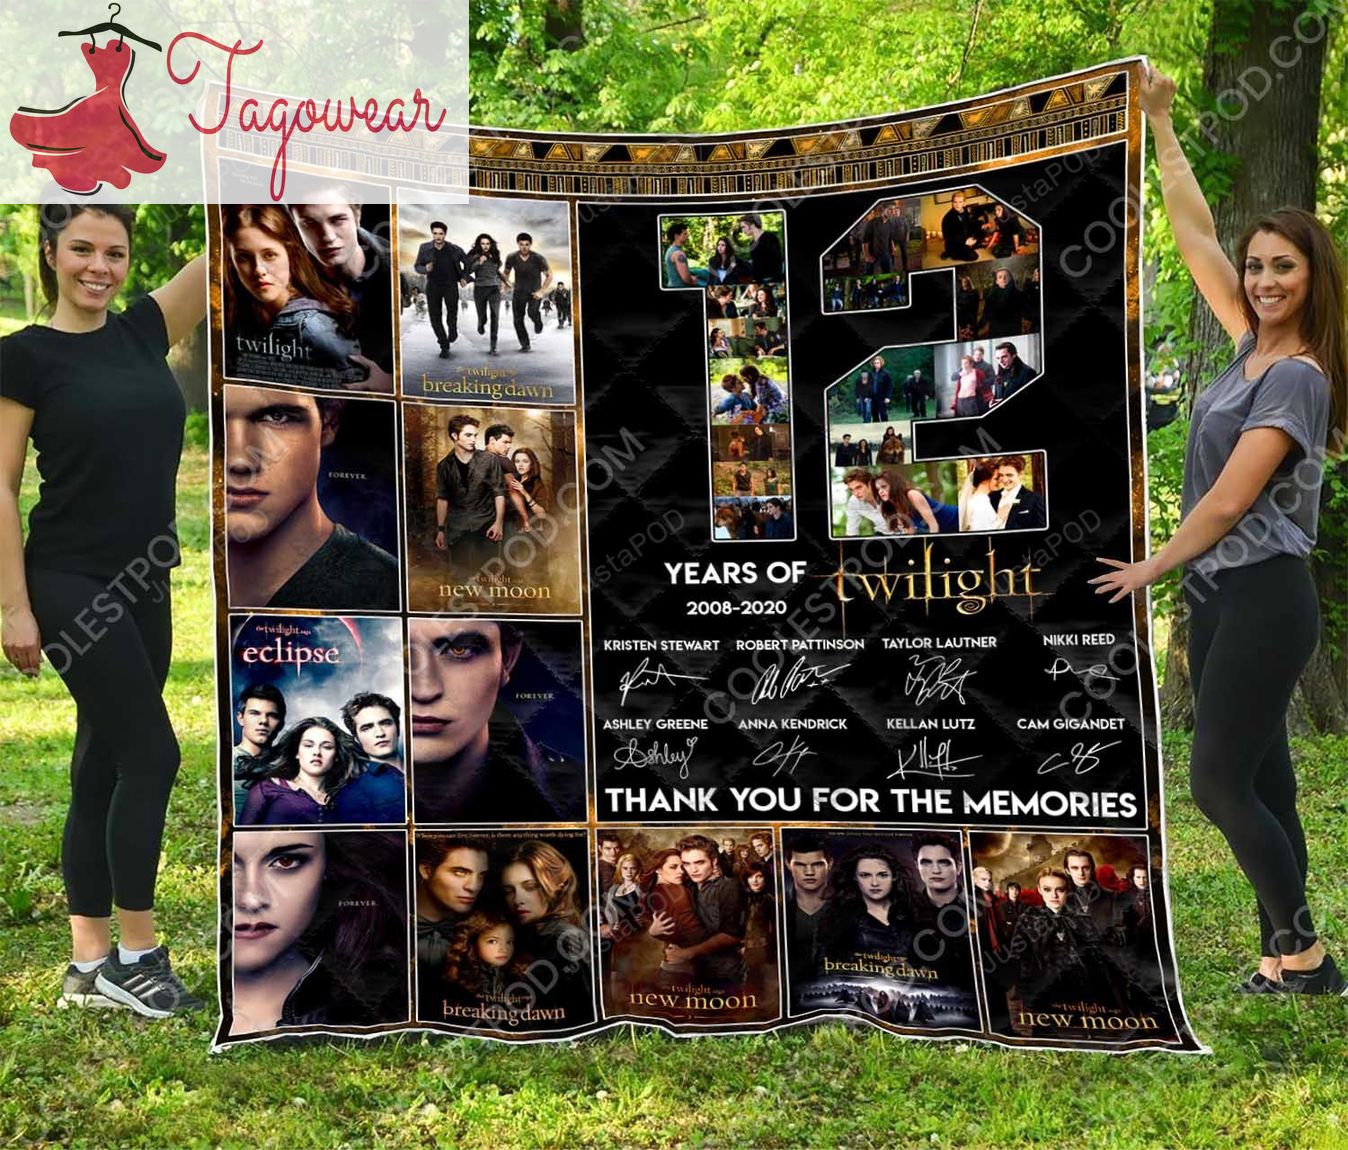 12 Of Years Twilight 2008-2020 Thank You For The Memories Signatures Quilt Blanket